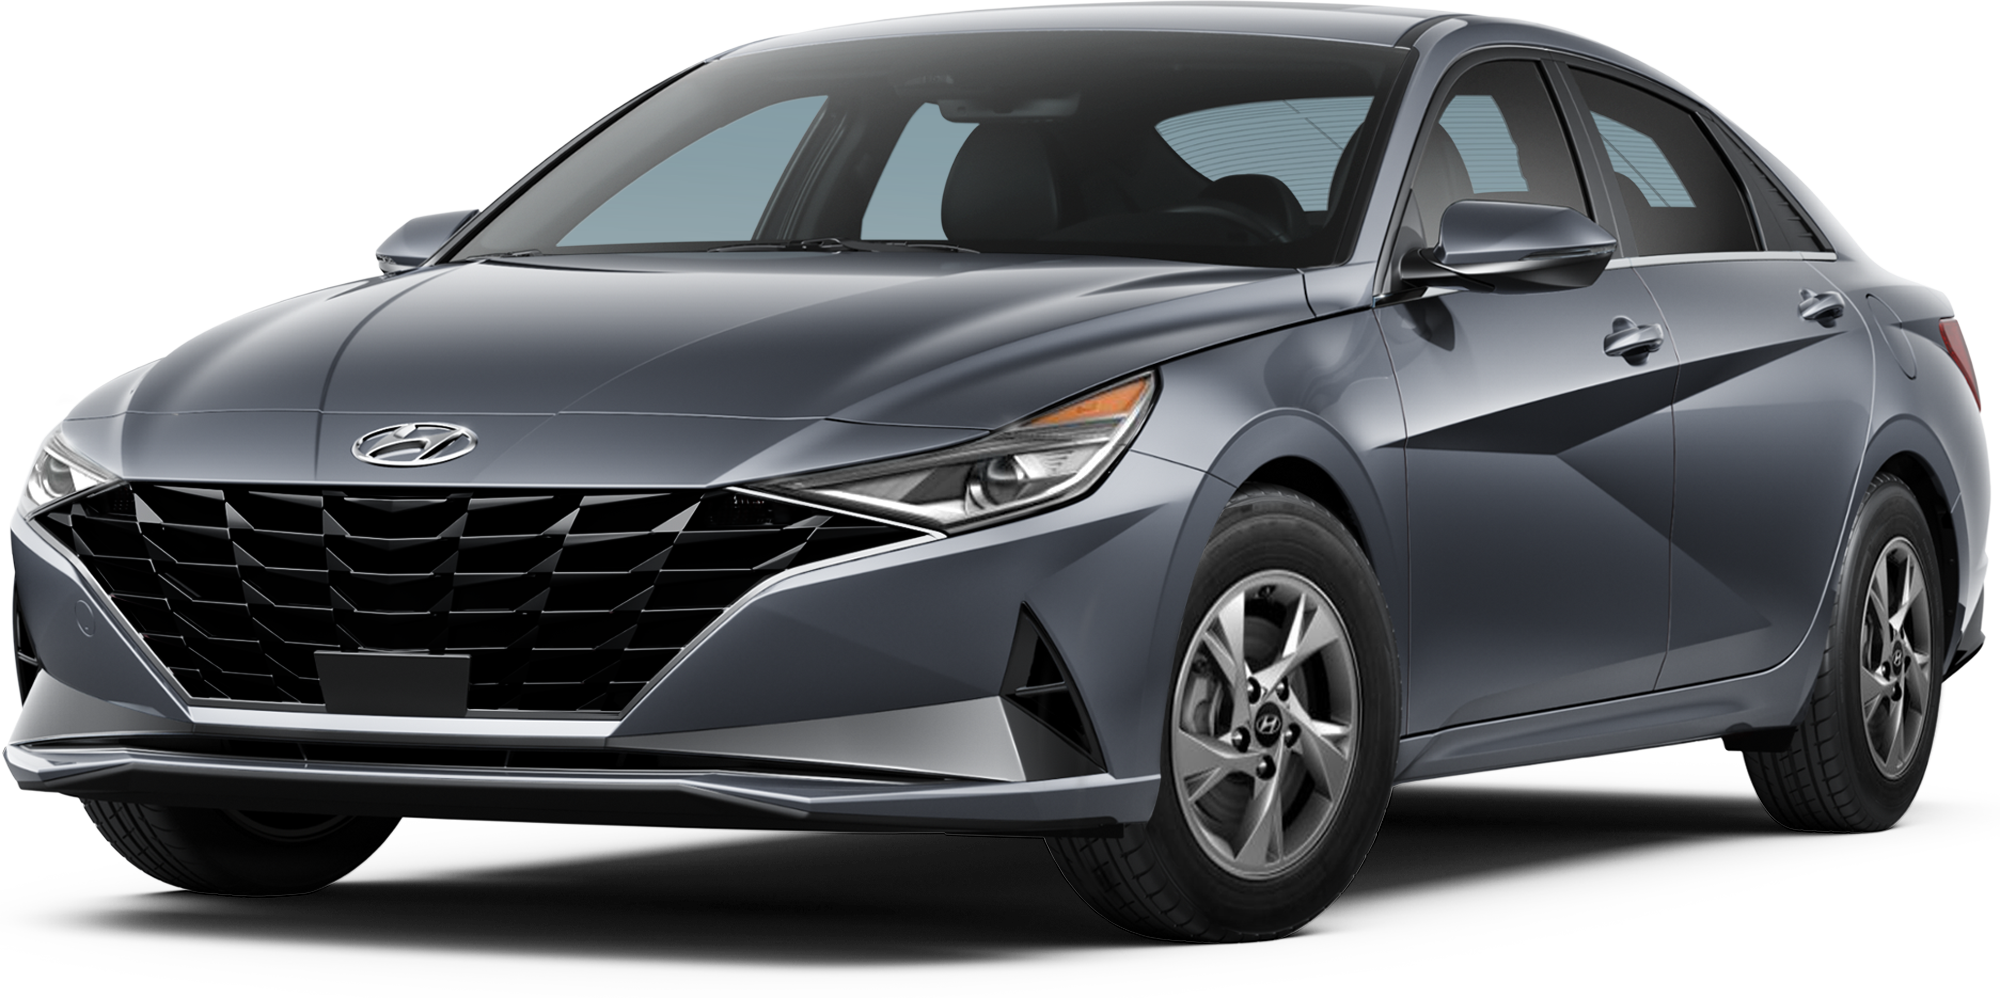 2021 Hyundai Elantra Incentives, Specials & Offers in Clearwater FL